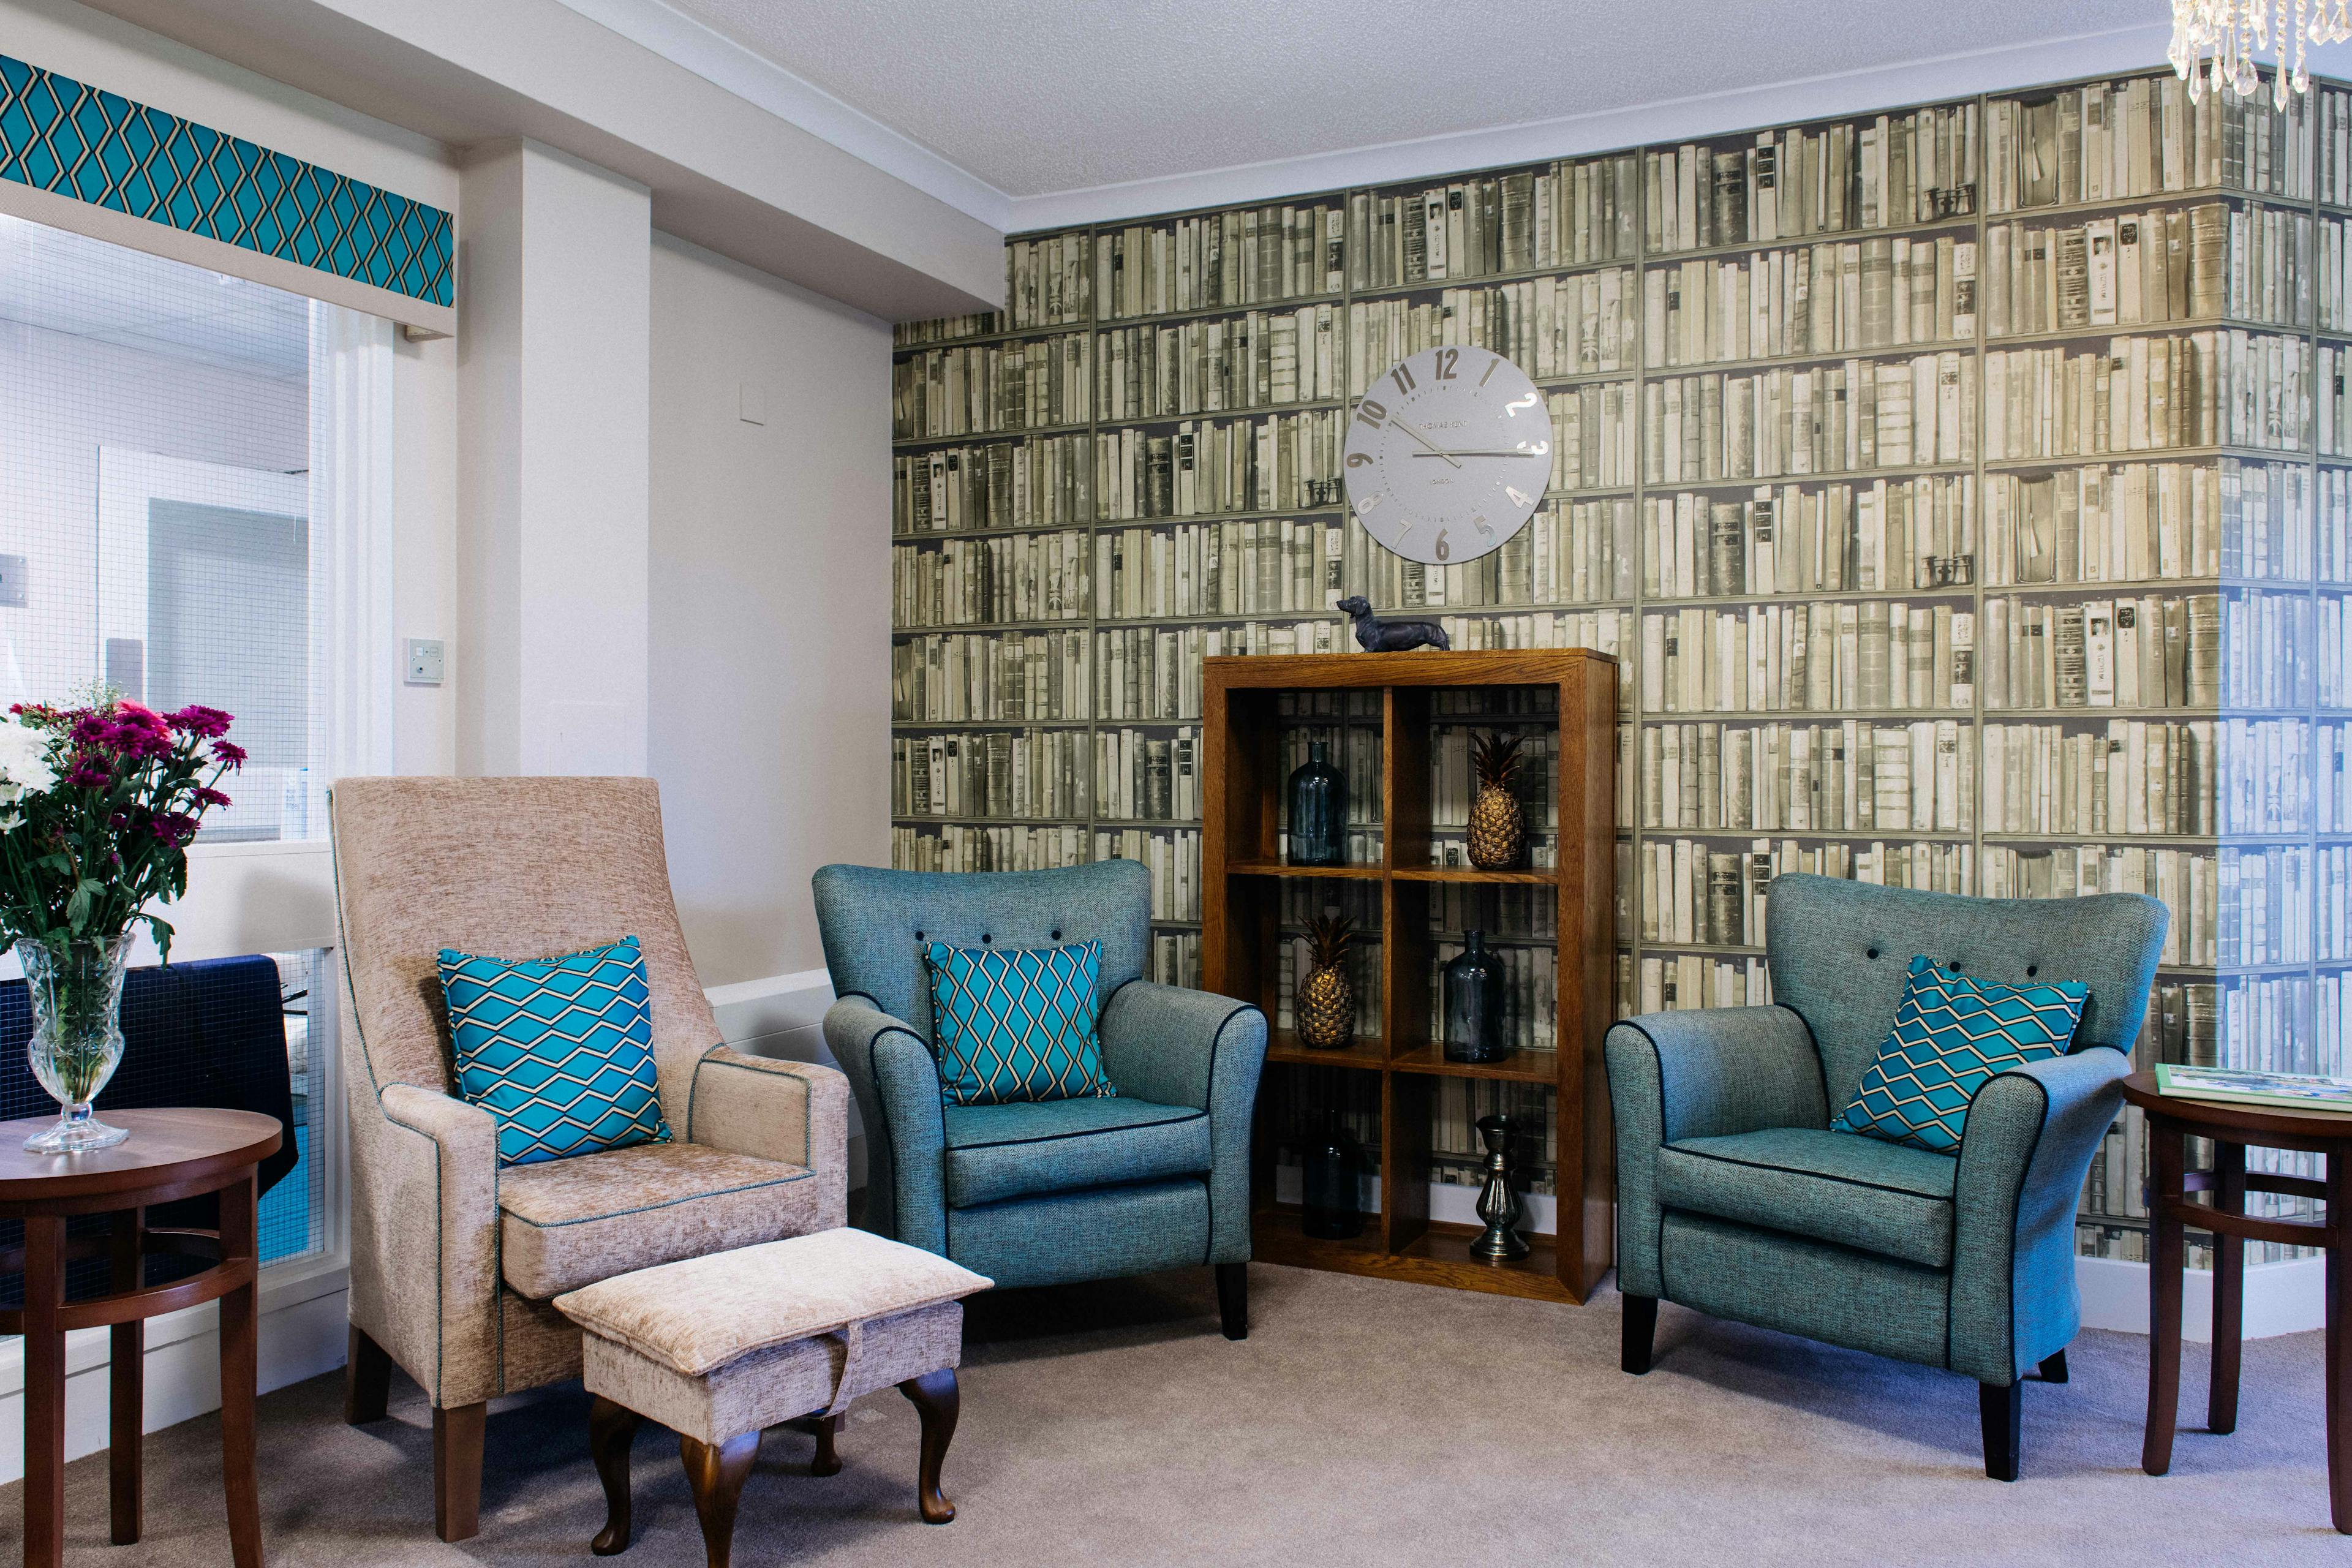 Communal Area at Lochduhar Care Home in Dumfries and Galloway, The Stewartry of Kirkcudbright